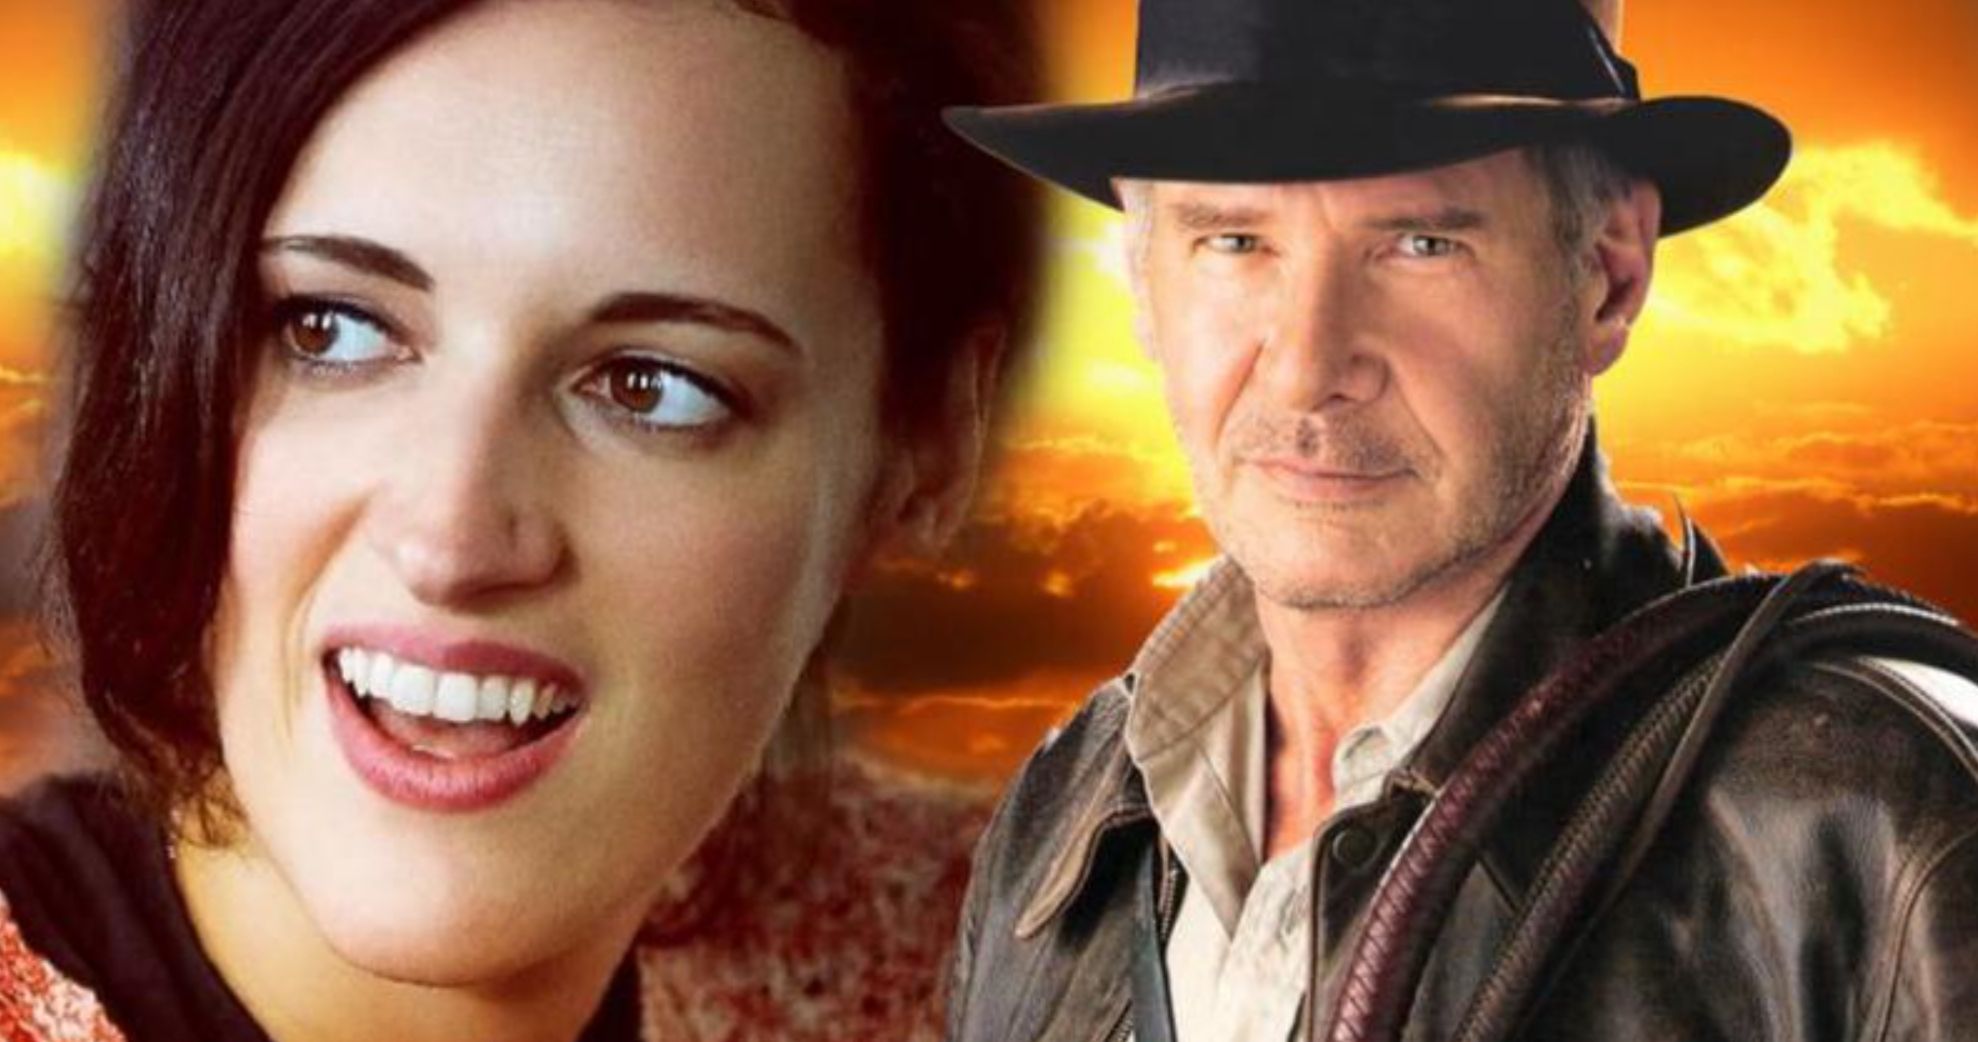 Is Indiana Jones 5 Setting Up Phoebe Waller-Bridge to Replace Harrison Ford?